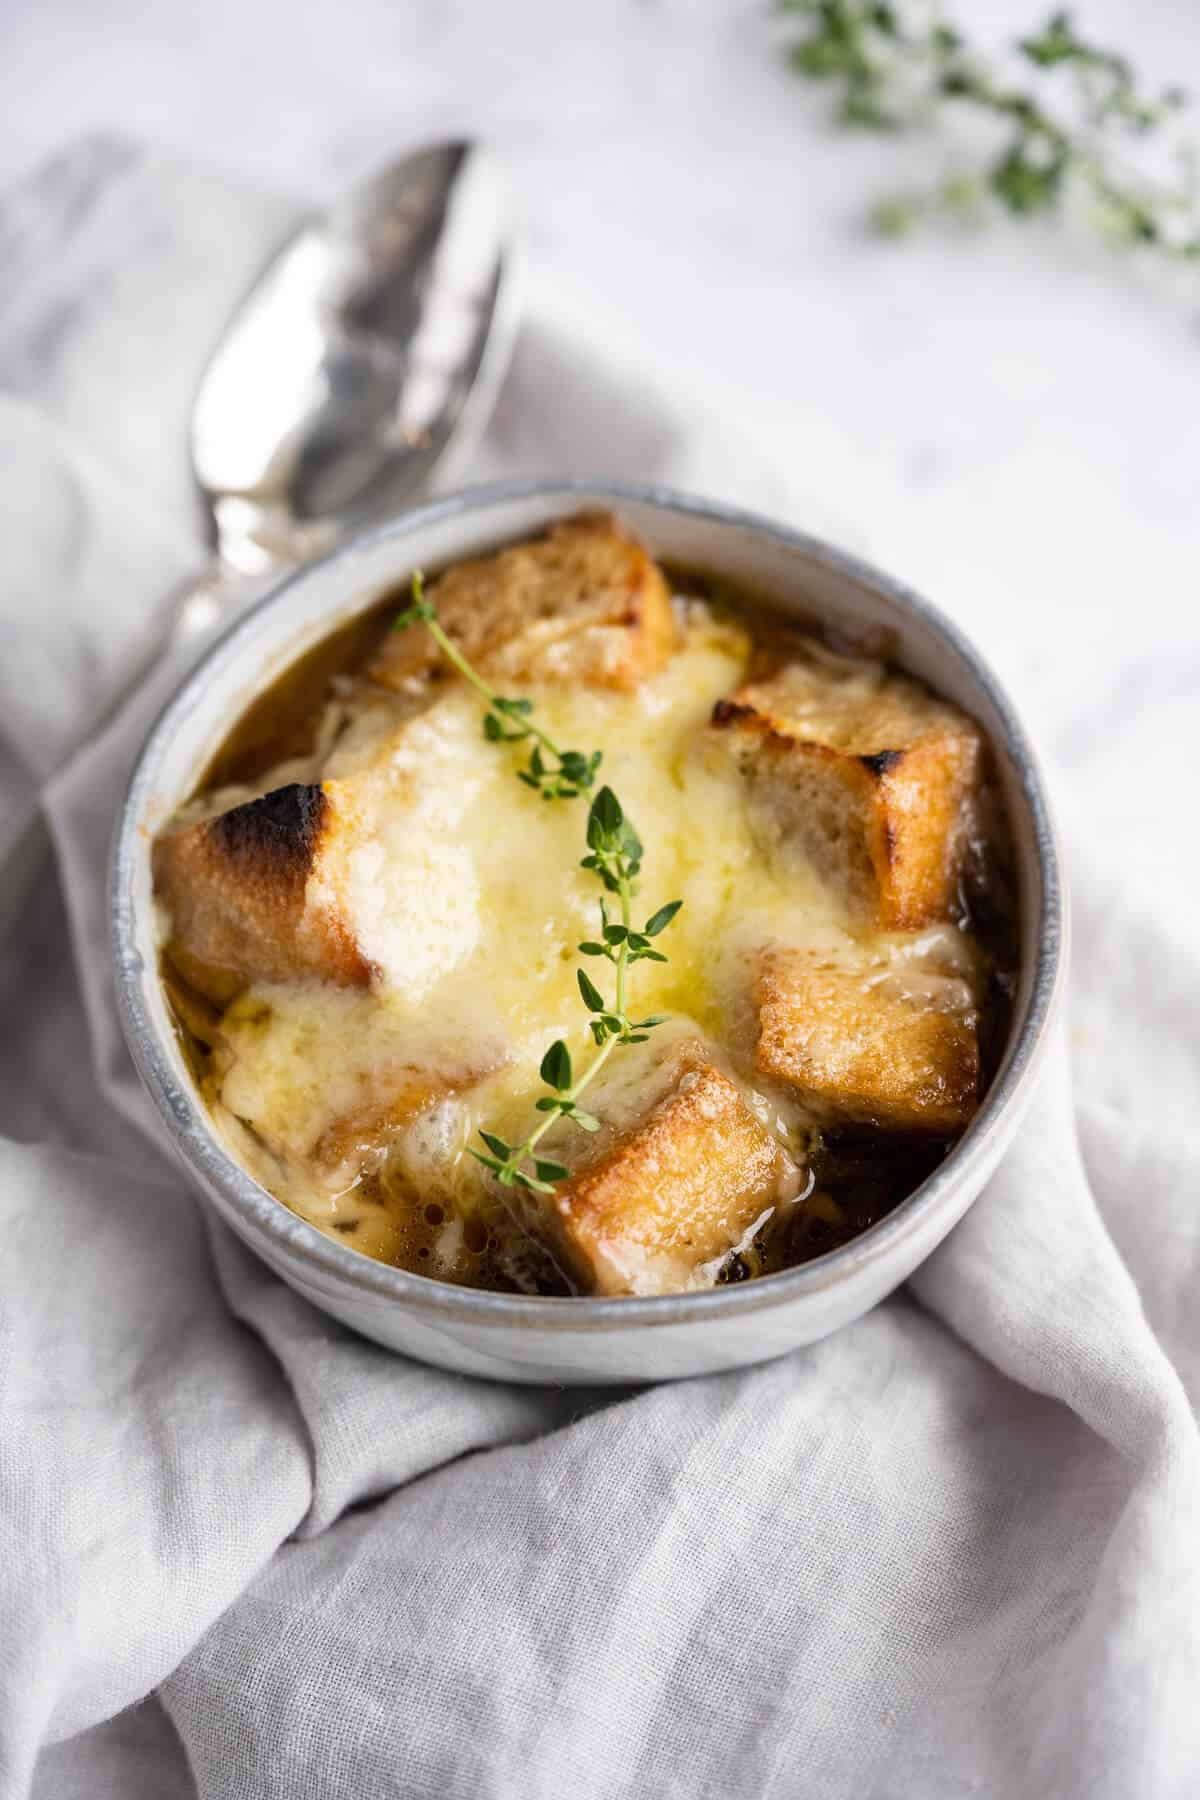 Bowl of French Onion Soup topped with crusty croutons and melted gruyere cheese, garnished with a sprig of thyme.